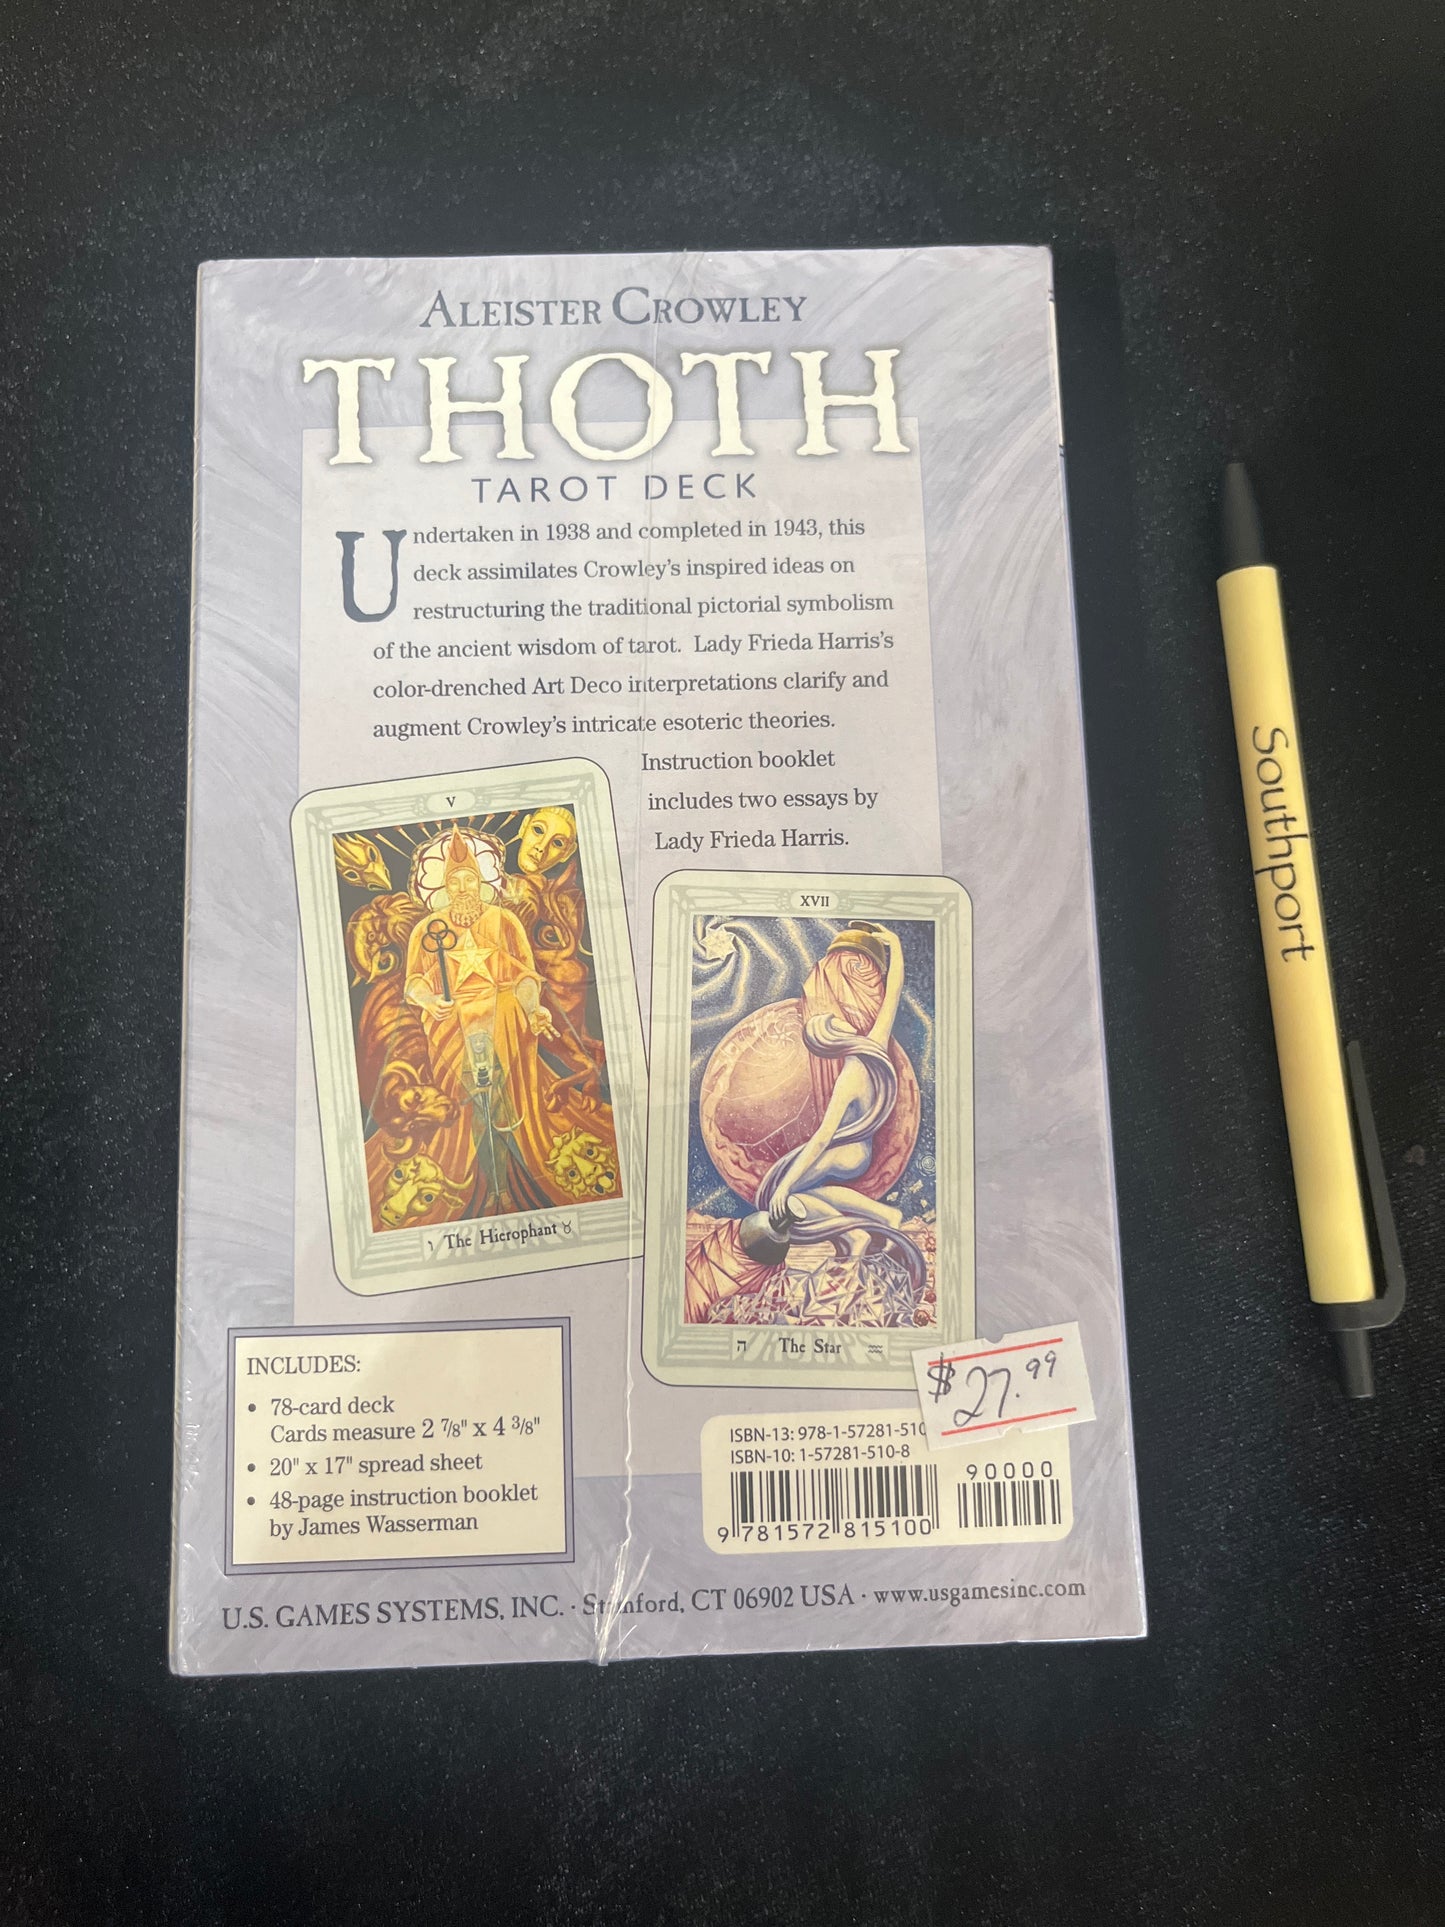 Aleister Crowley THOTH tarot deck